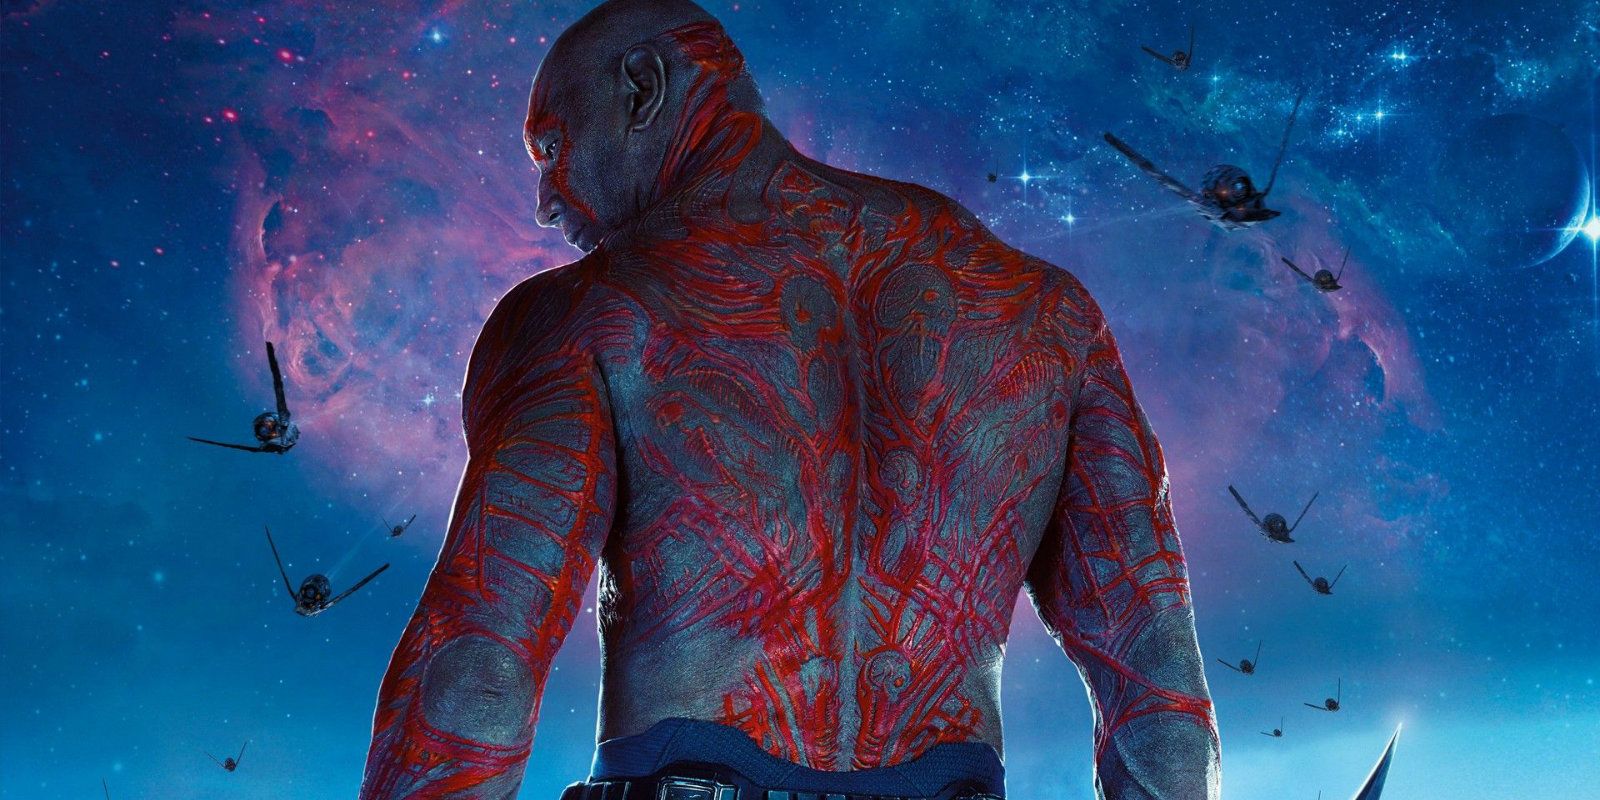 Drax from Guardians of the Galaxy